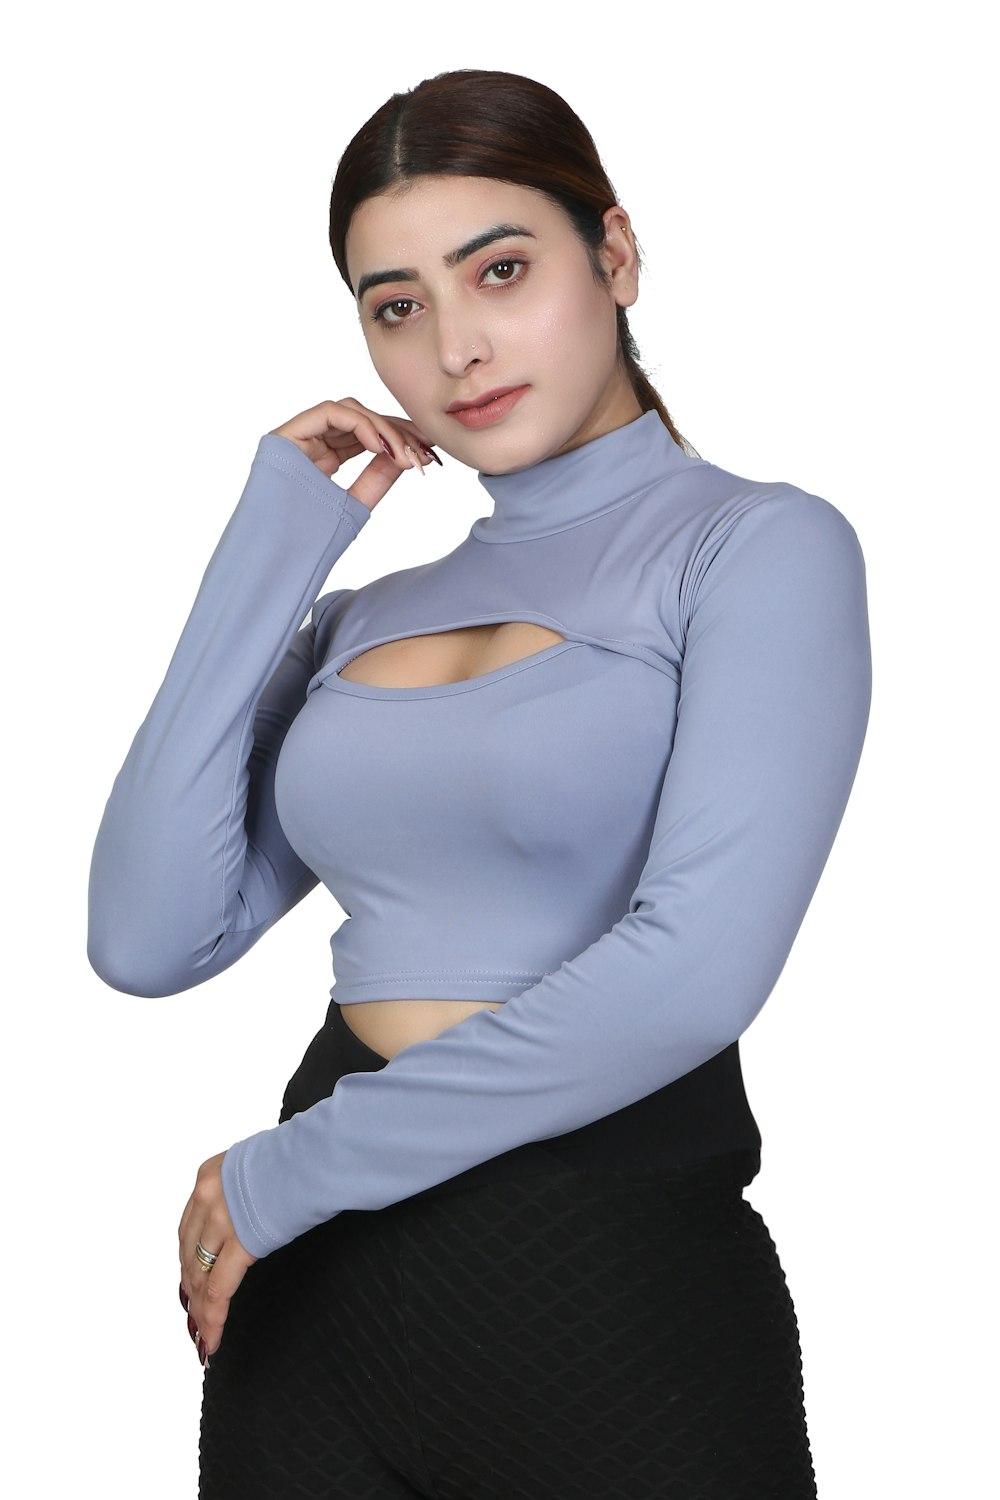 a woman in a blue top posing for a picture